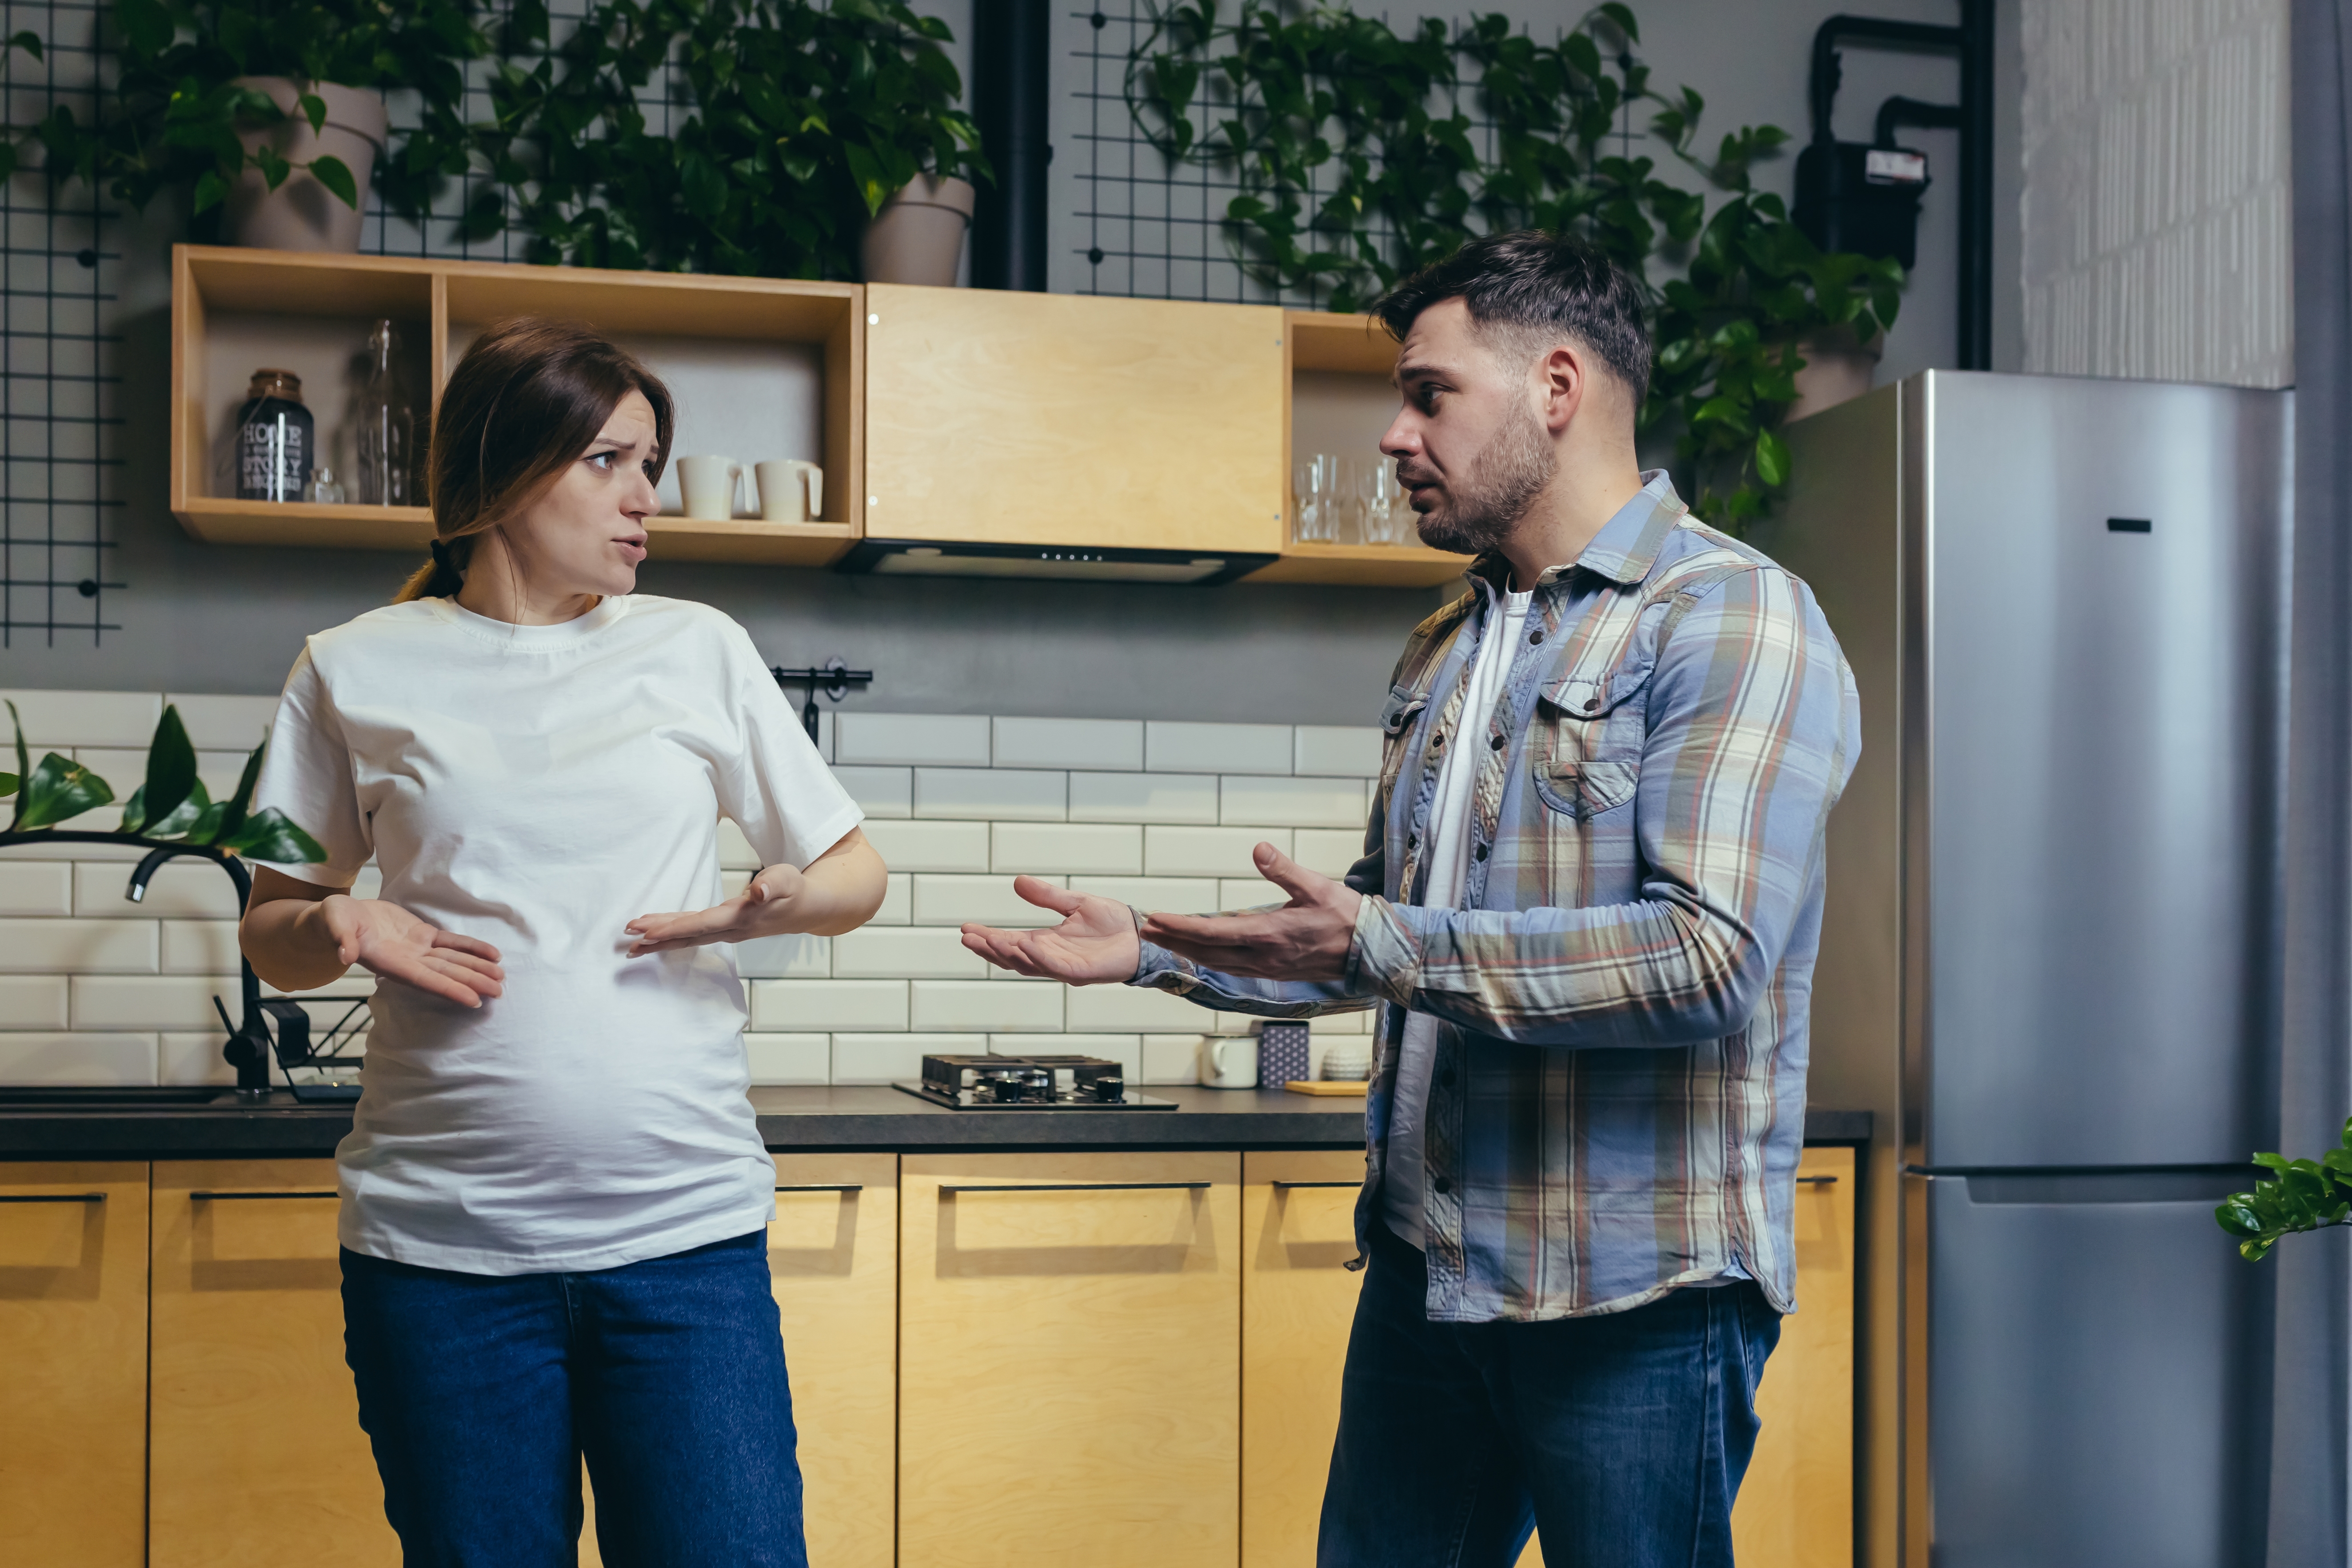 A pregnant woman arguing with a man | Source: Shutterstock